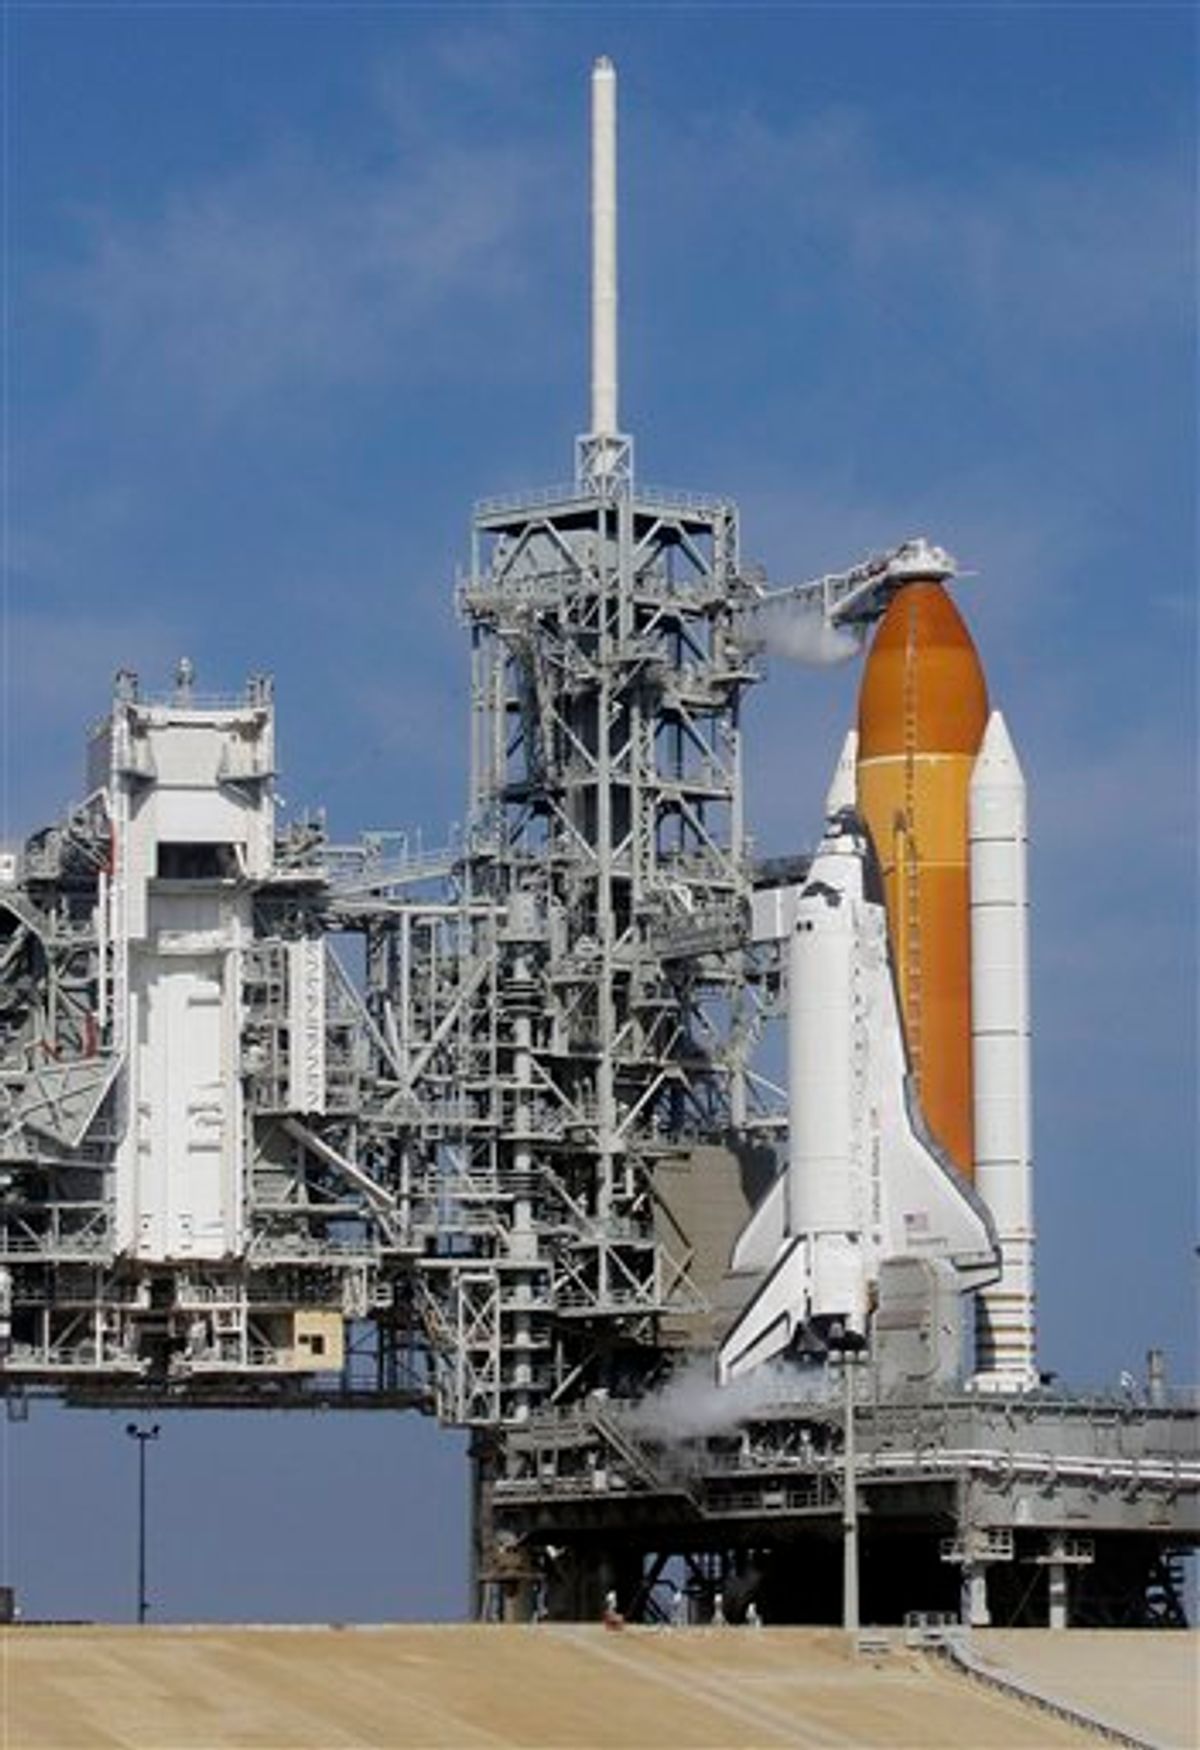 Fuel is loaded into the space shuttle Discovery as she sits on the launch pad at the Kennedy Space Center in Cape Canaveral, Fla., Thursday, Feb. 24, 2011. Discovery and her crew of six astronauts are scheduled to lift off this afternoon on an 11-day mission to the international space station. (AP Photo/John Raoux)  (AP)